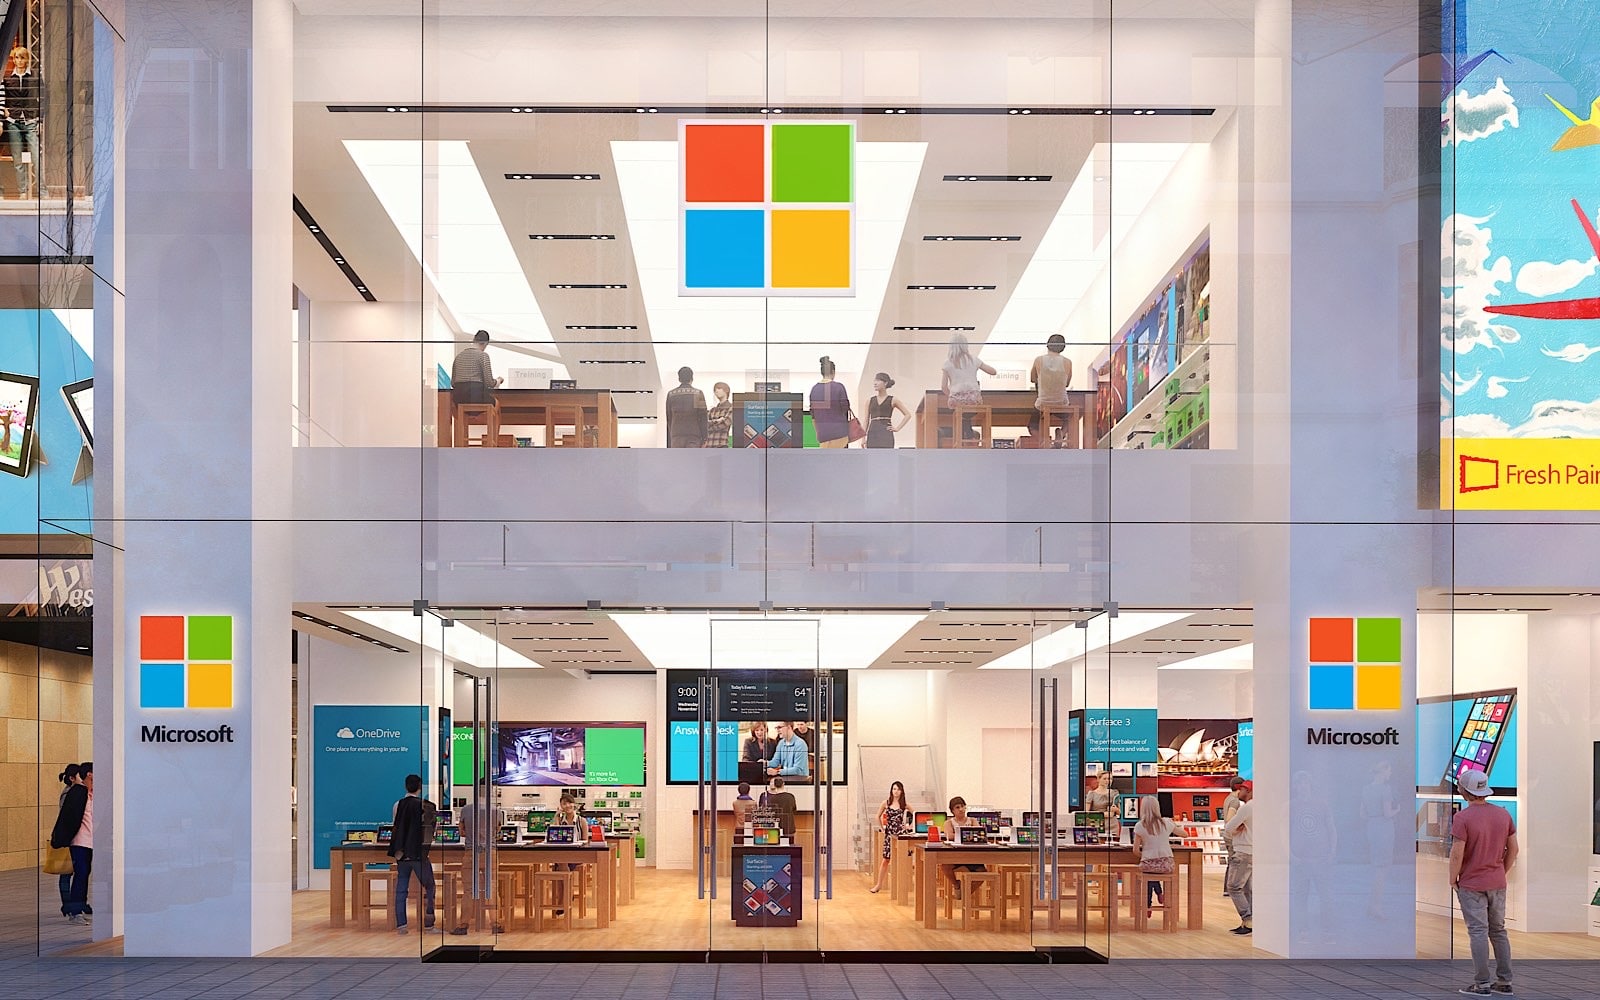 Microsoft Store Sydney at its launch in late 2015